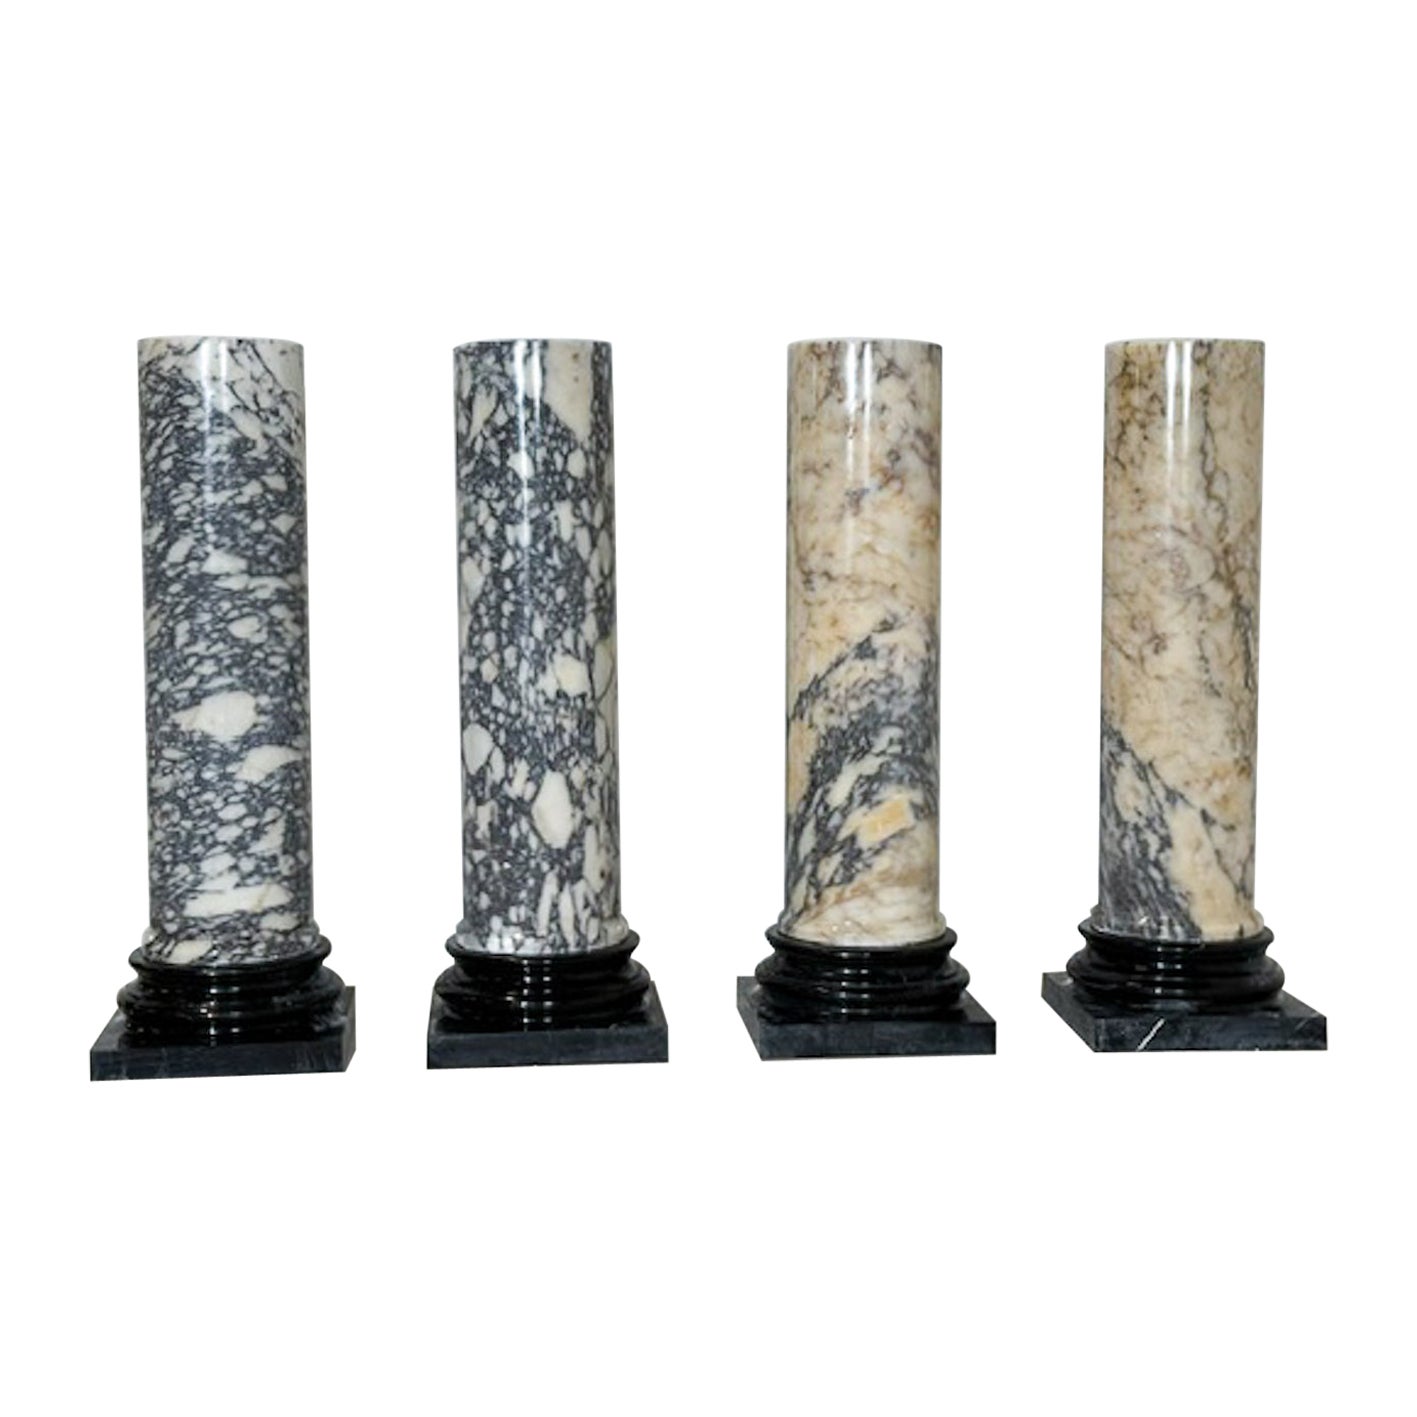 One Pair of Marble Columns, Italy, 1980s - Sold per pair For Sale